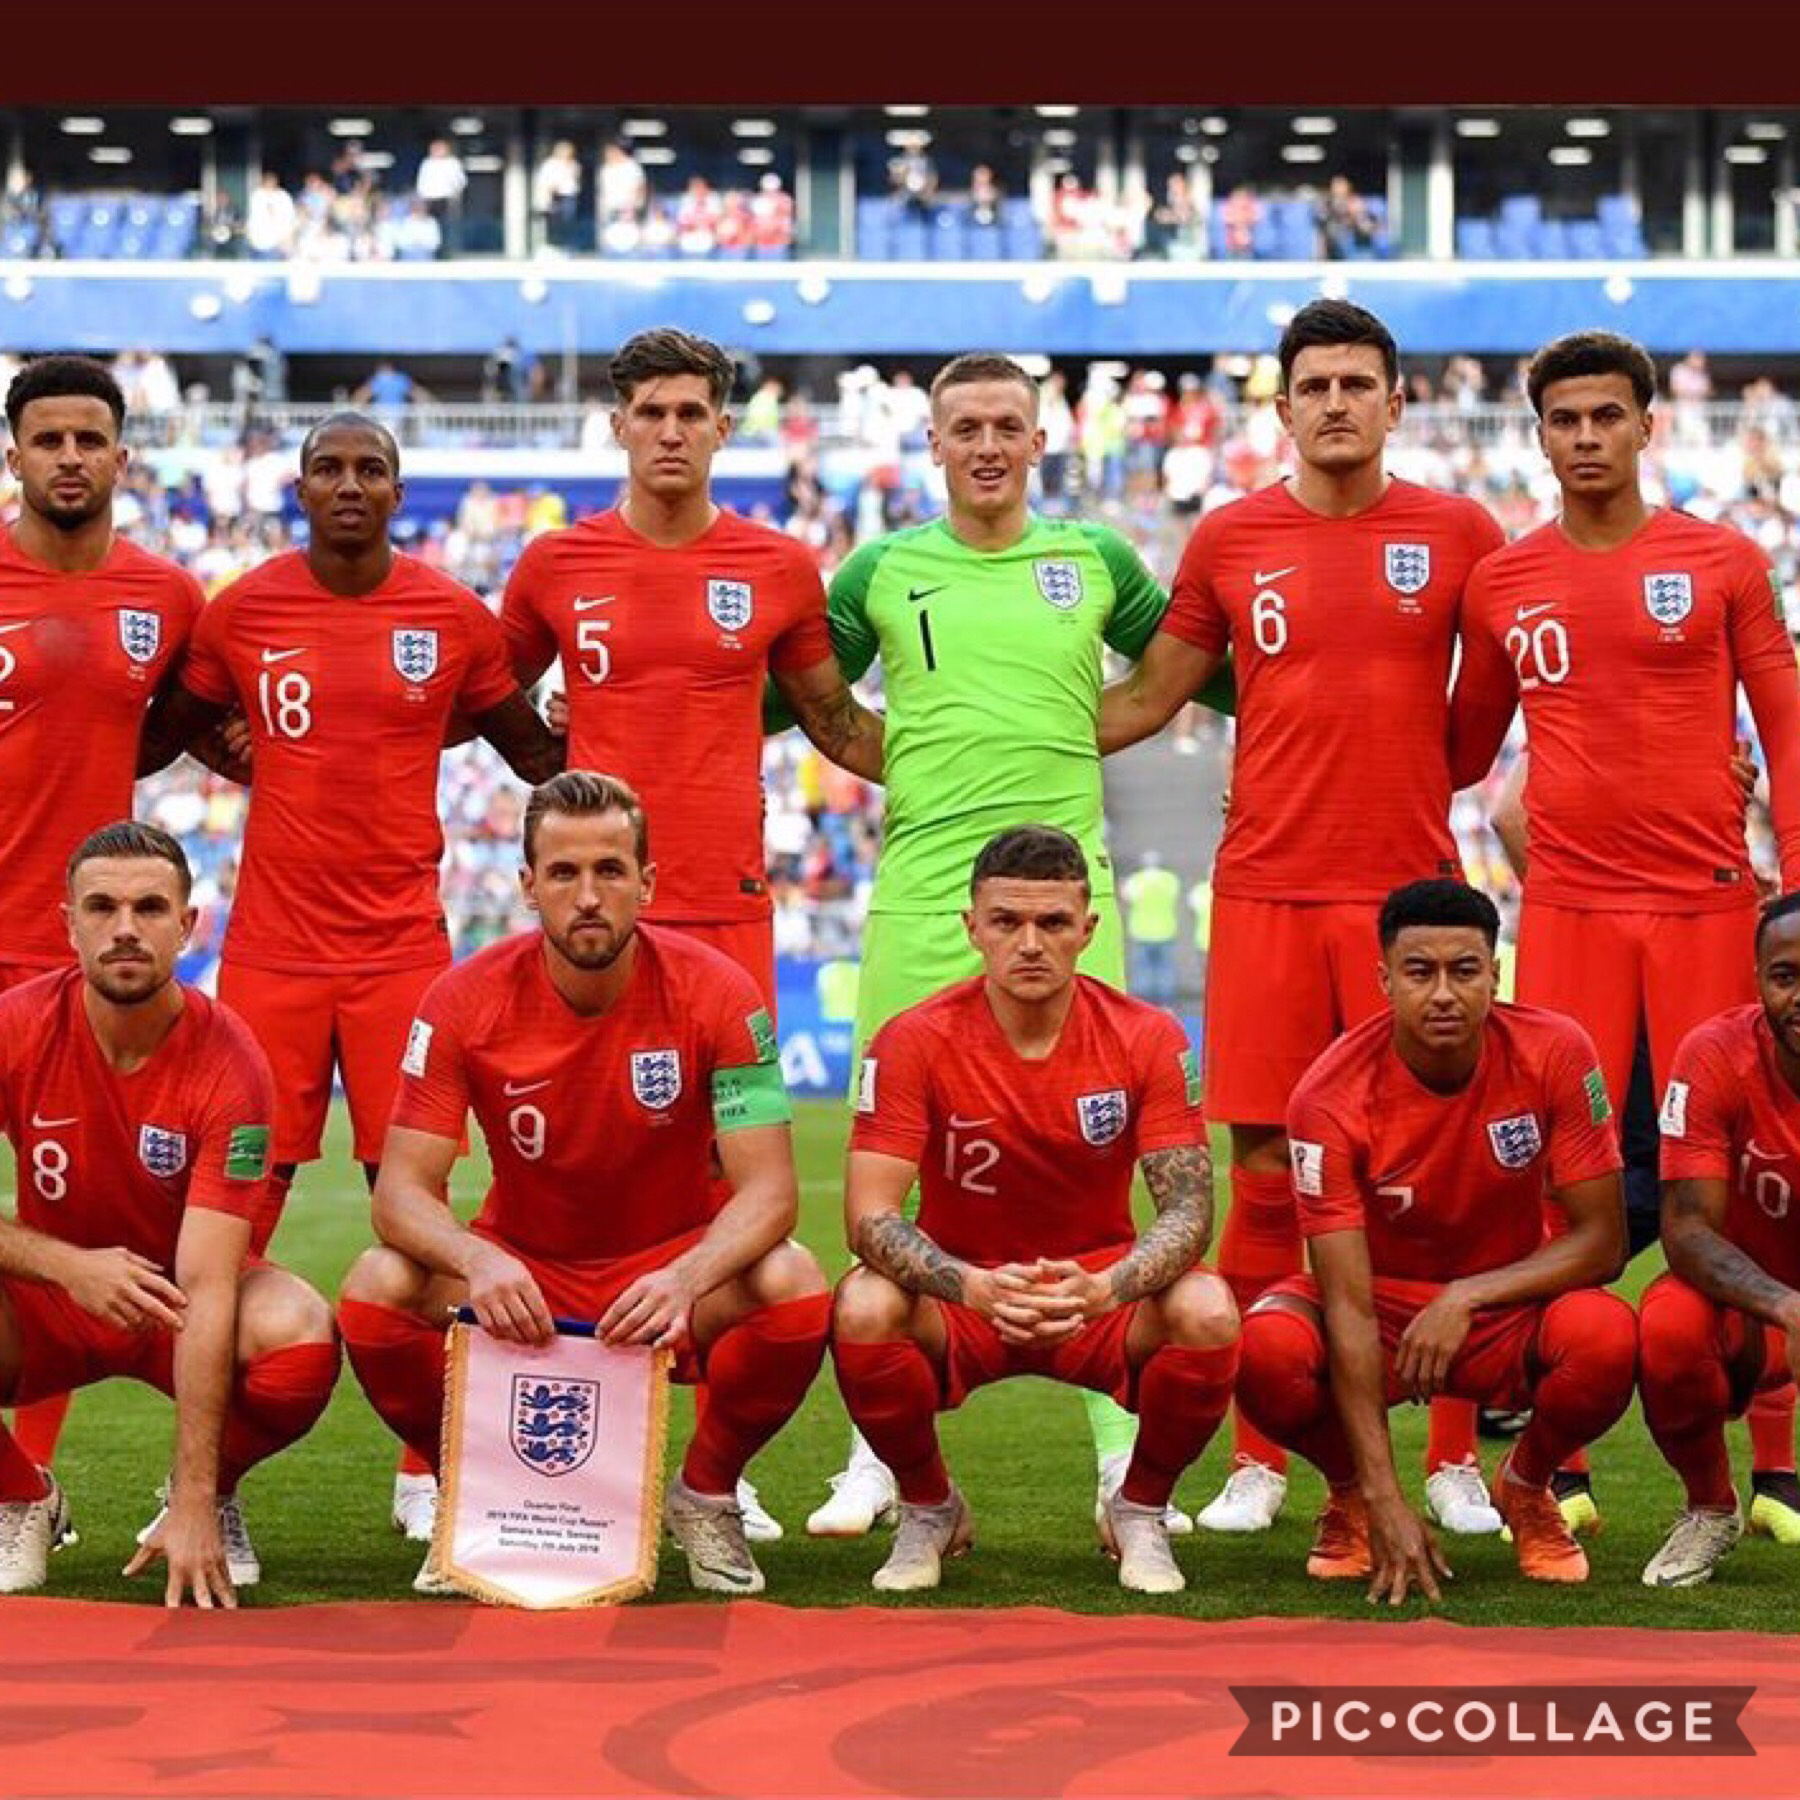 These lads are all in the semis!!!🏴󠁧󠁢󠁥󠁮󠁧󠁿